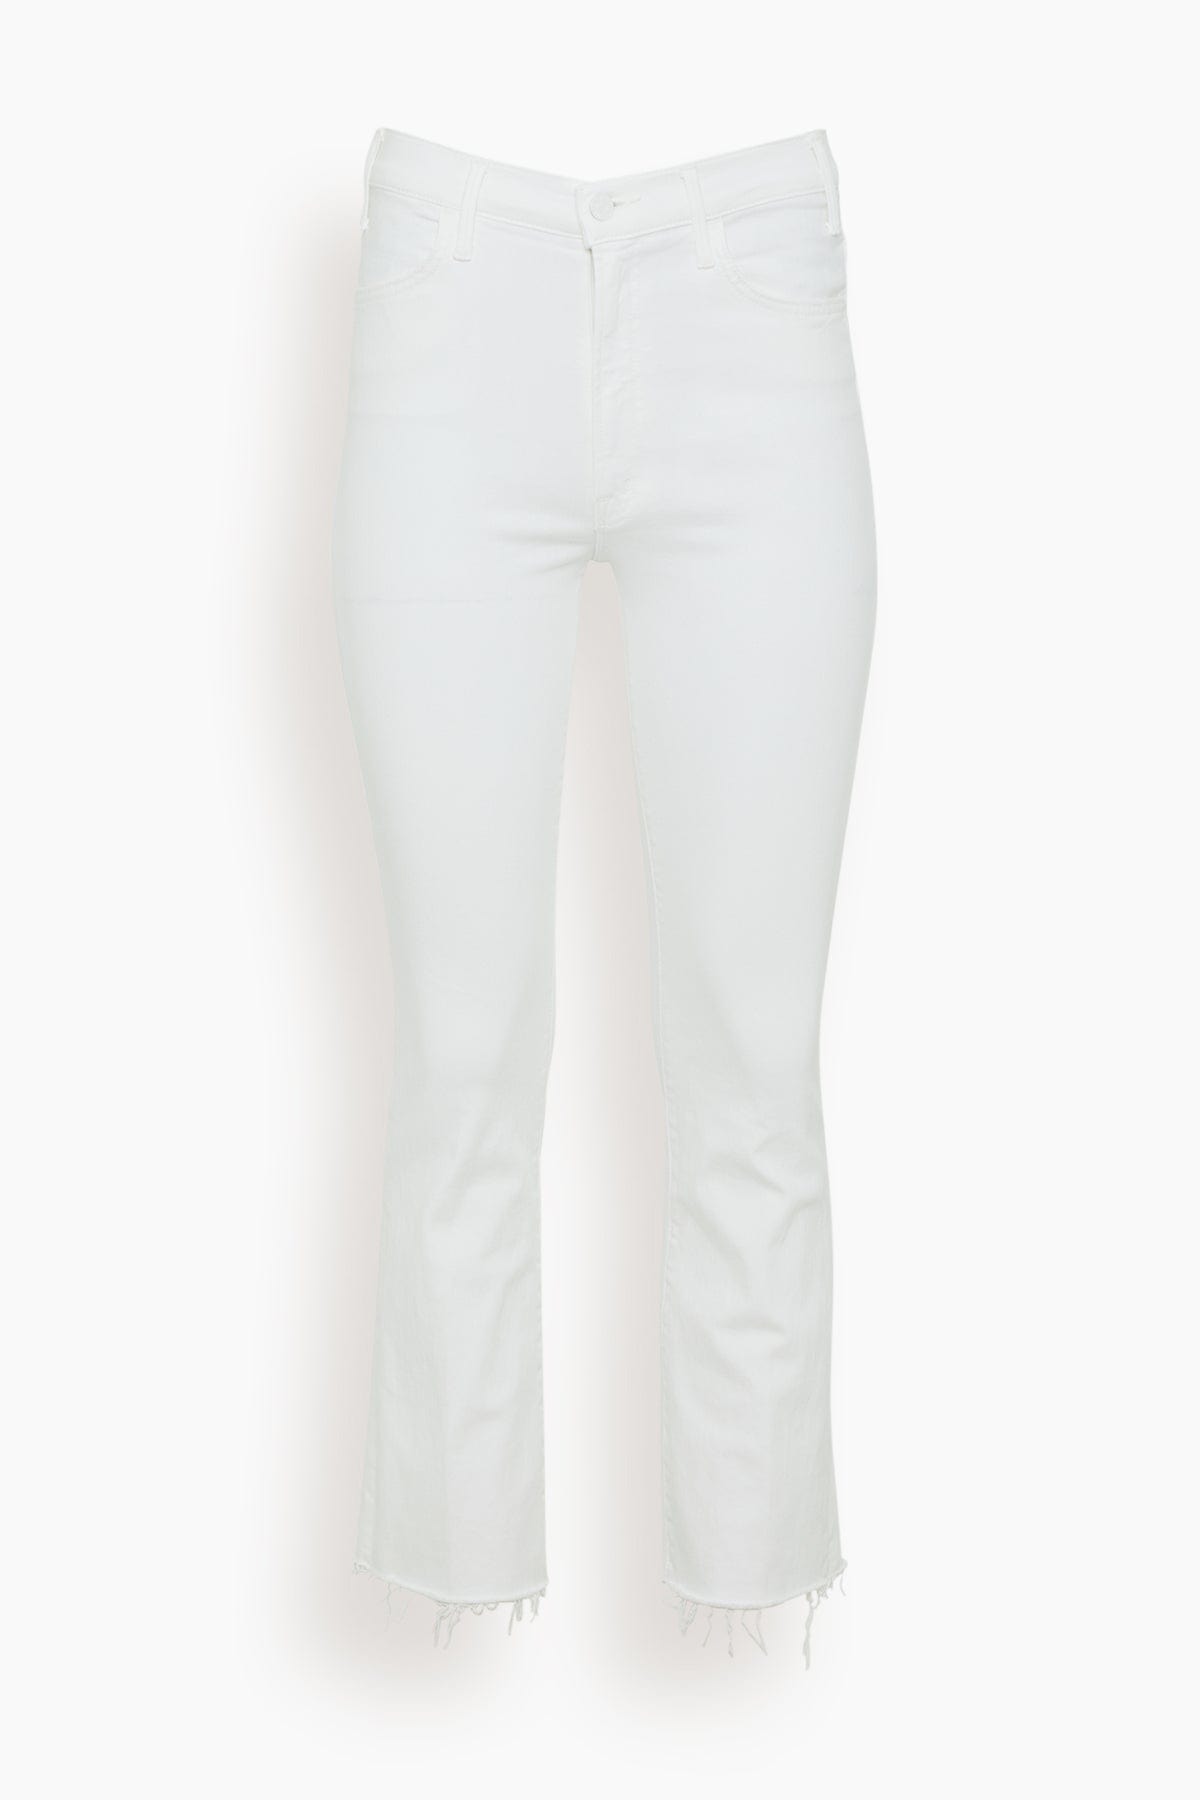 MOTHER The Hustler Ankle Fray Jean in Fairest of Them All - White - Size: 25